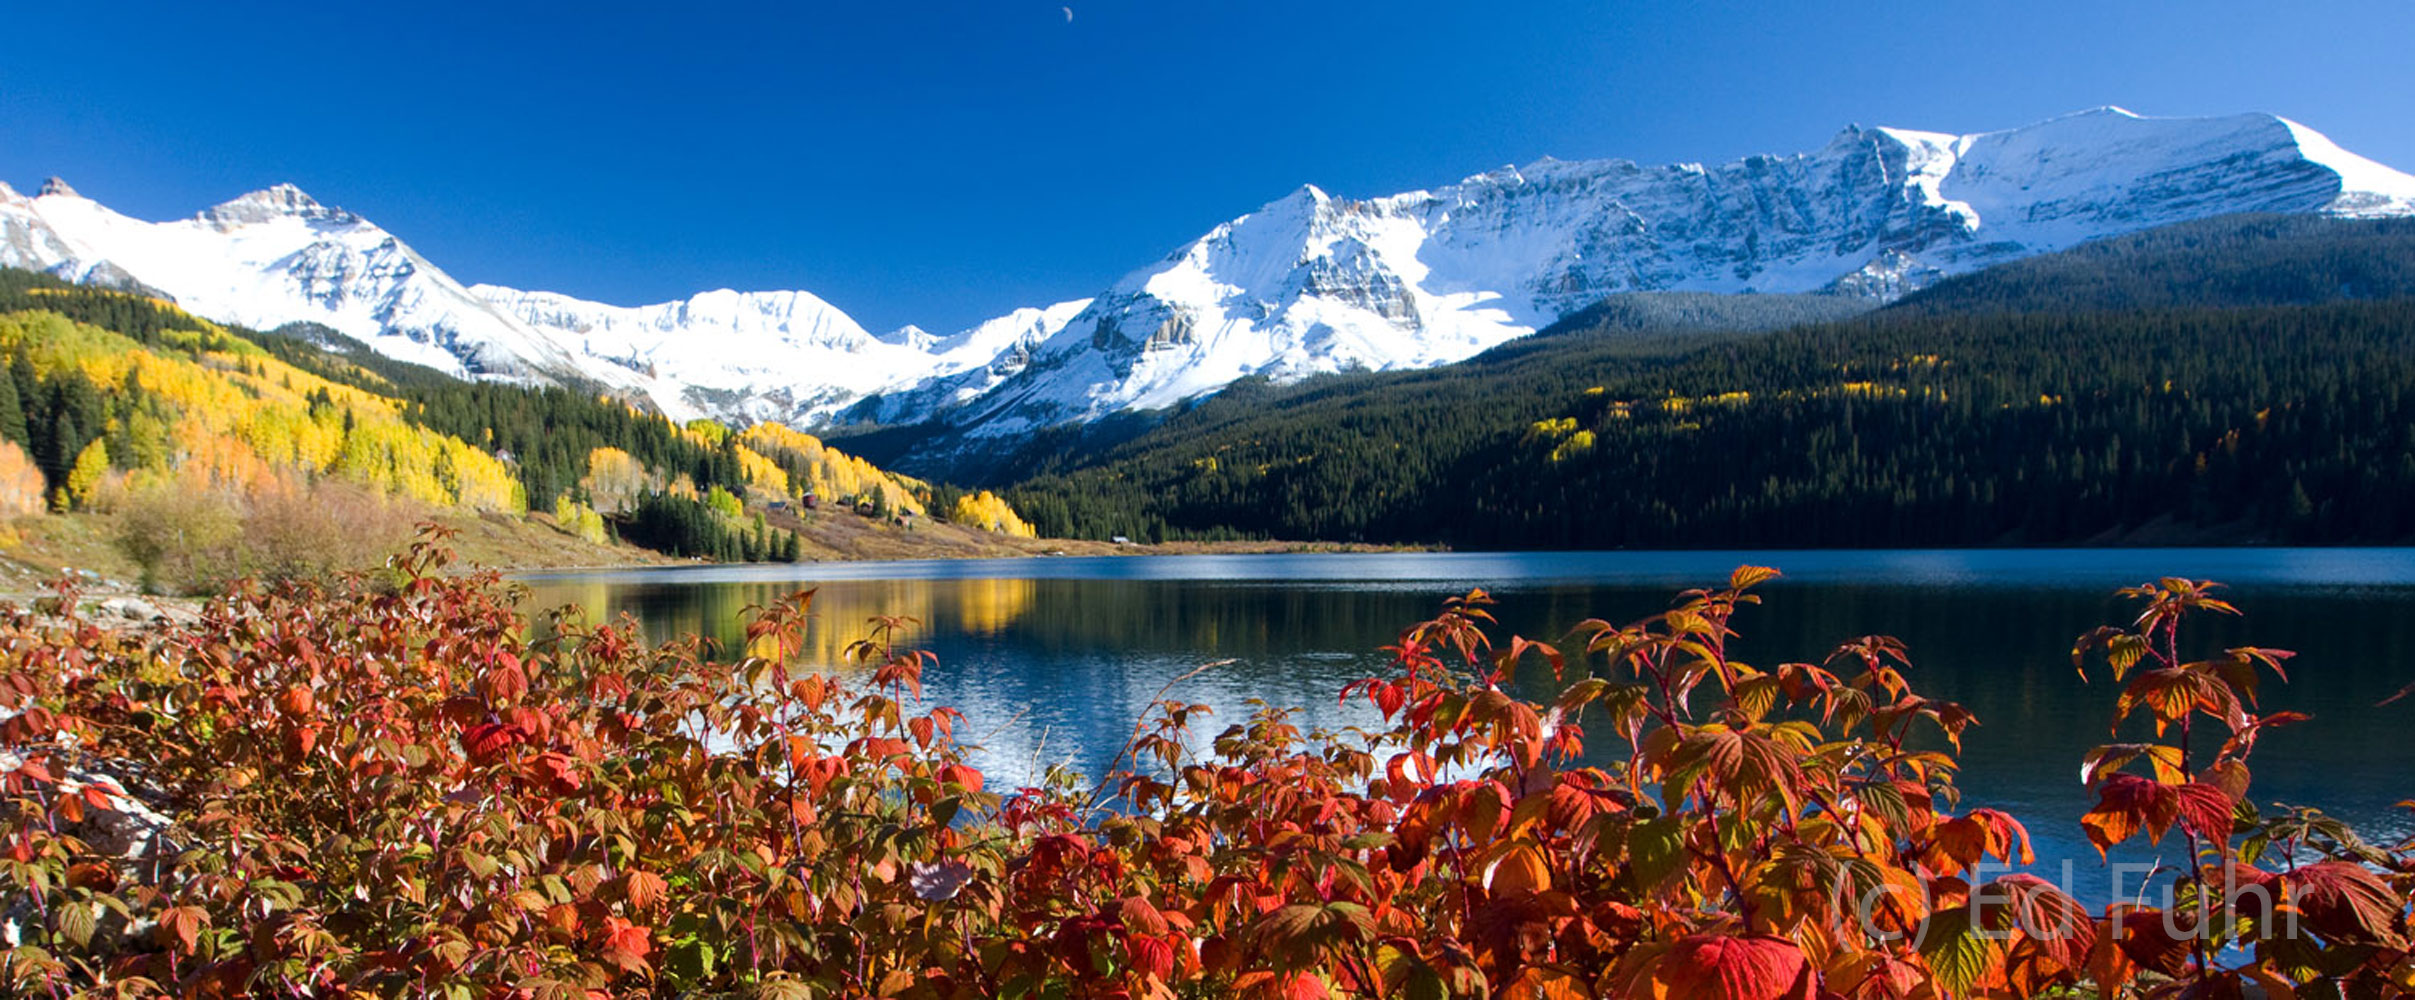 Sheltered from the wind, Trout Lake is surrounded by snowy peaks and a stunning array of yellows and reds&nbsp;